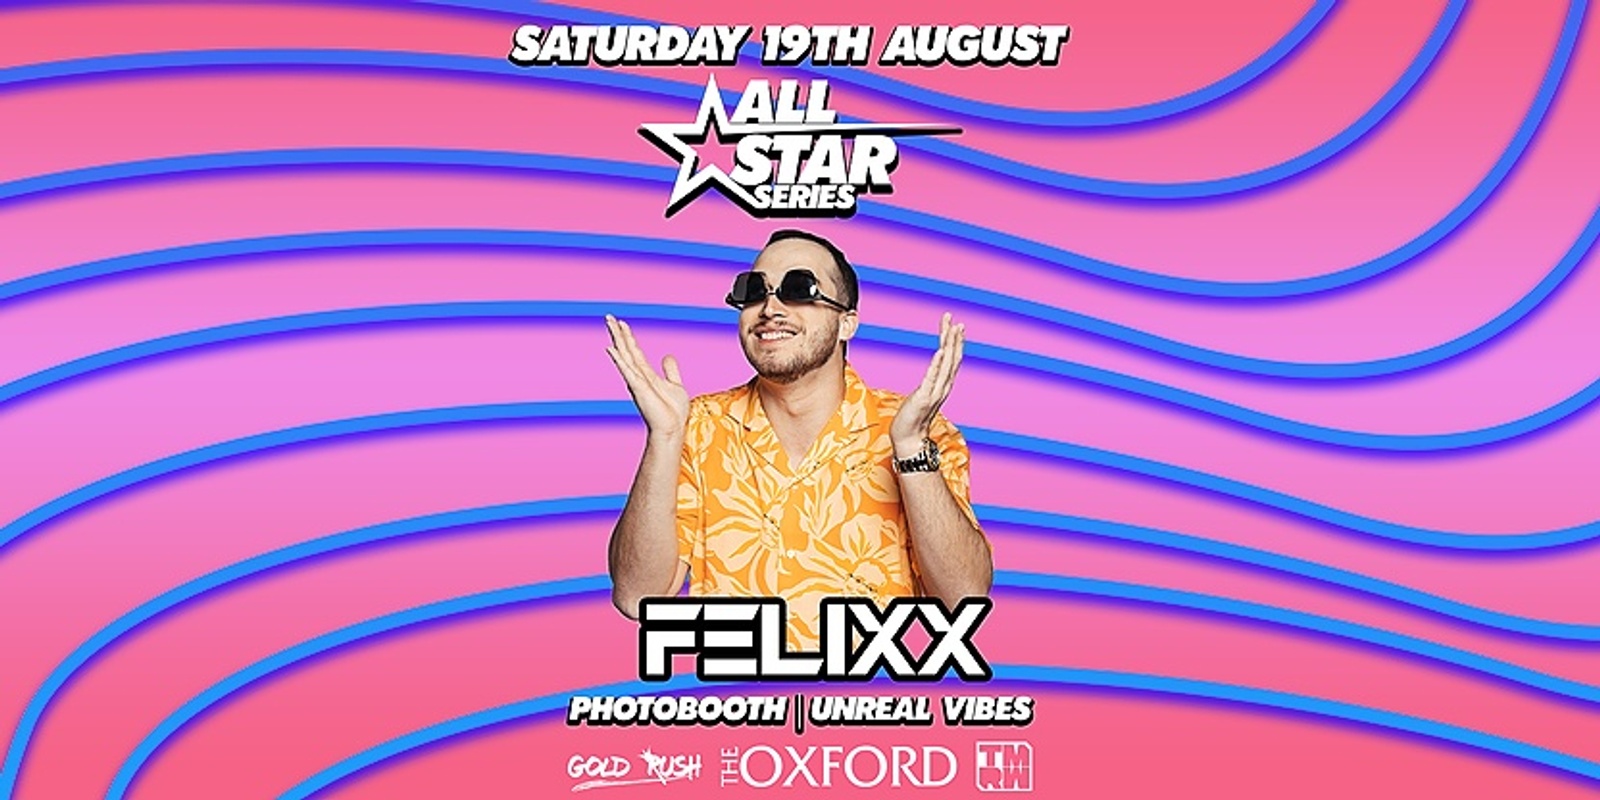 Banner image for ALL STAR SERIES || FELIXX || Saturday 19th August